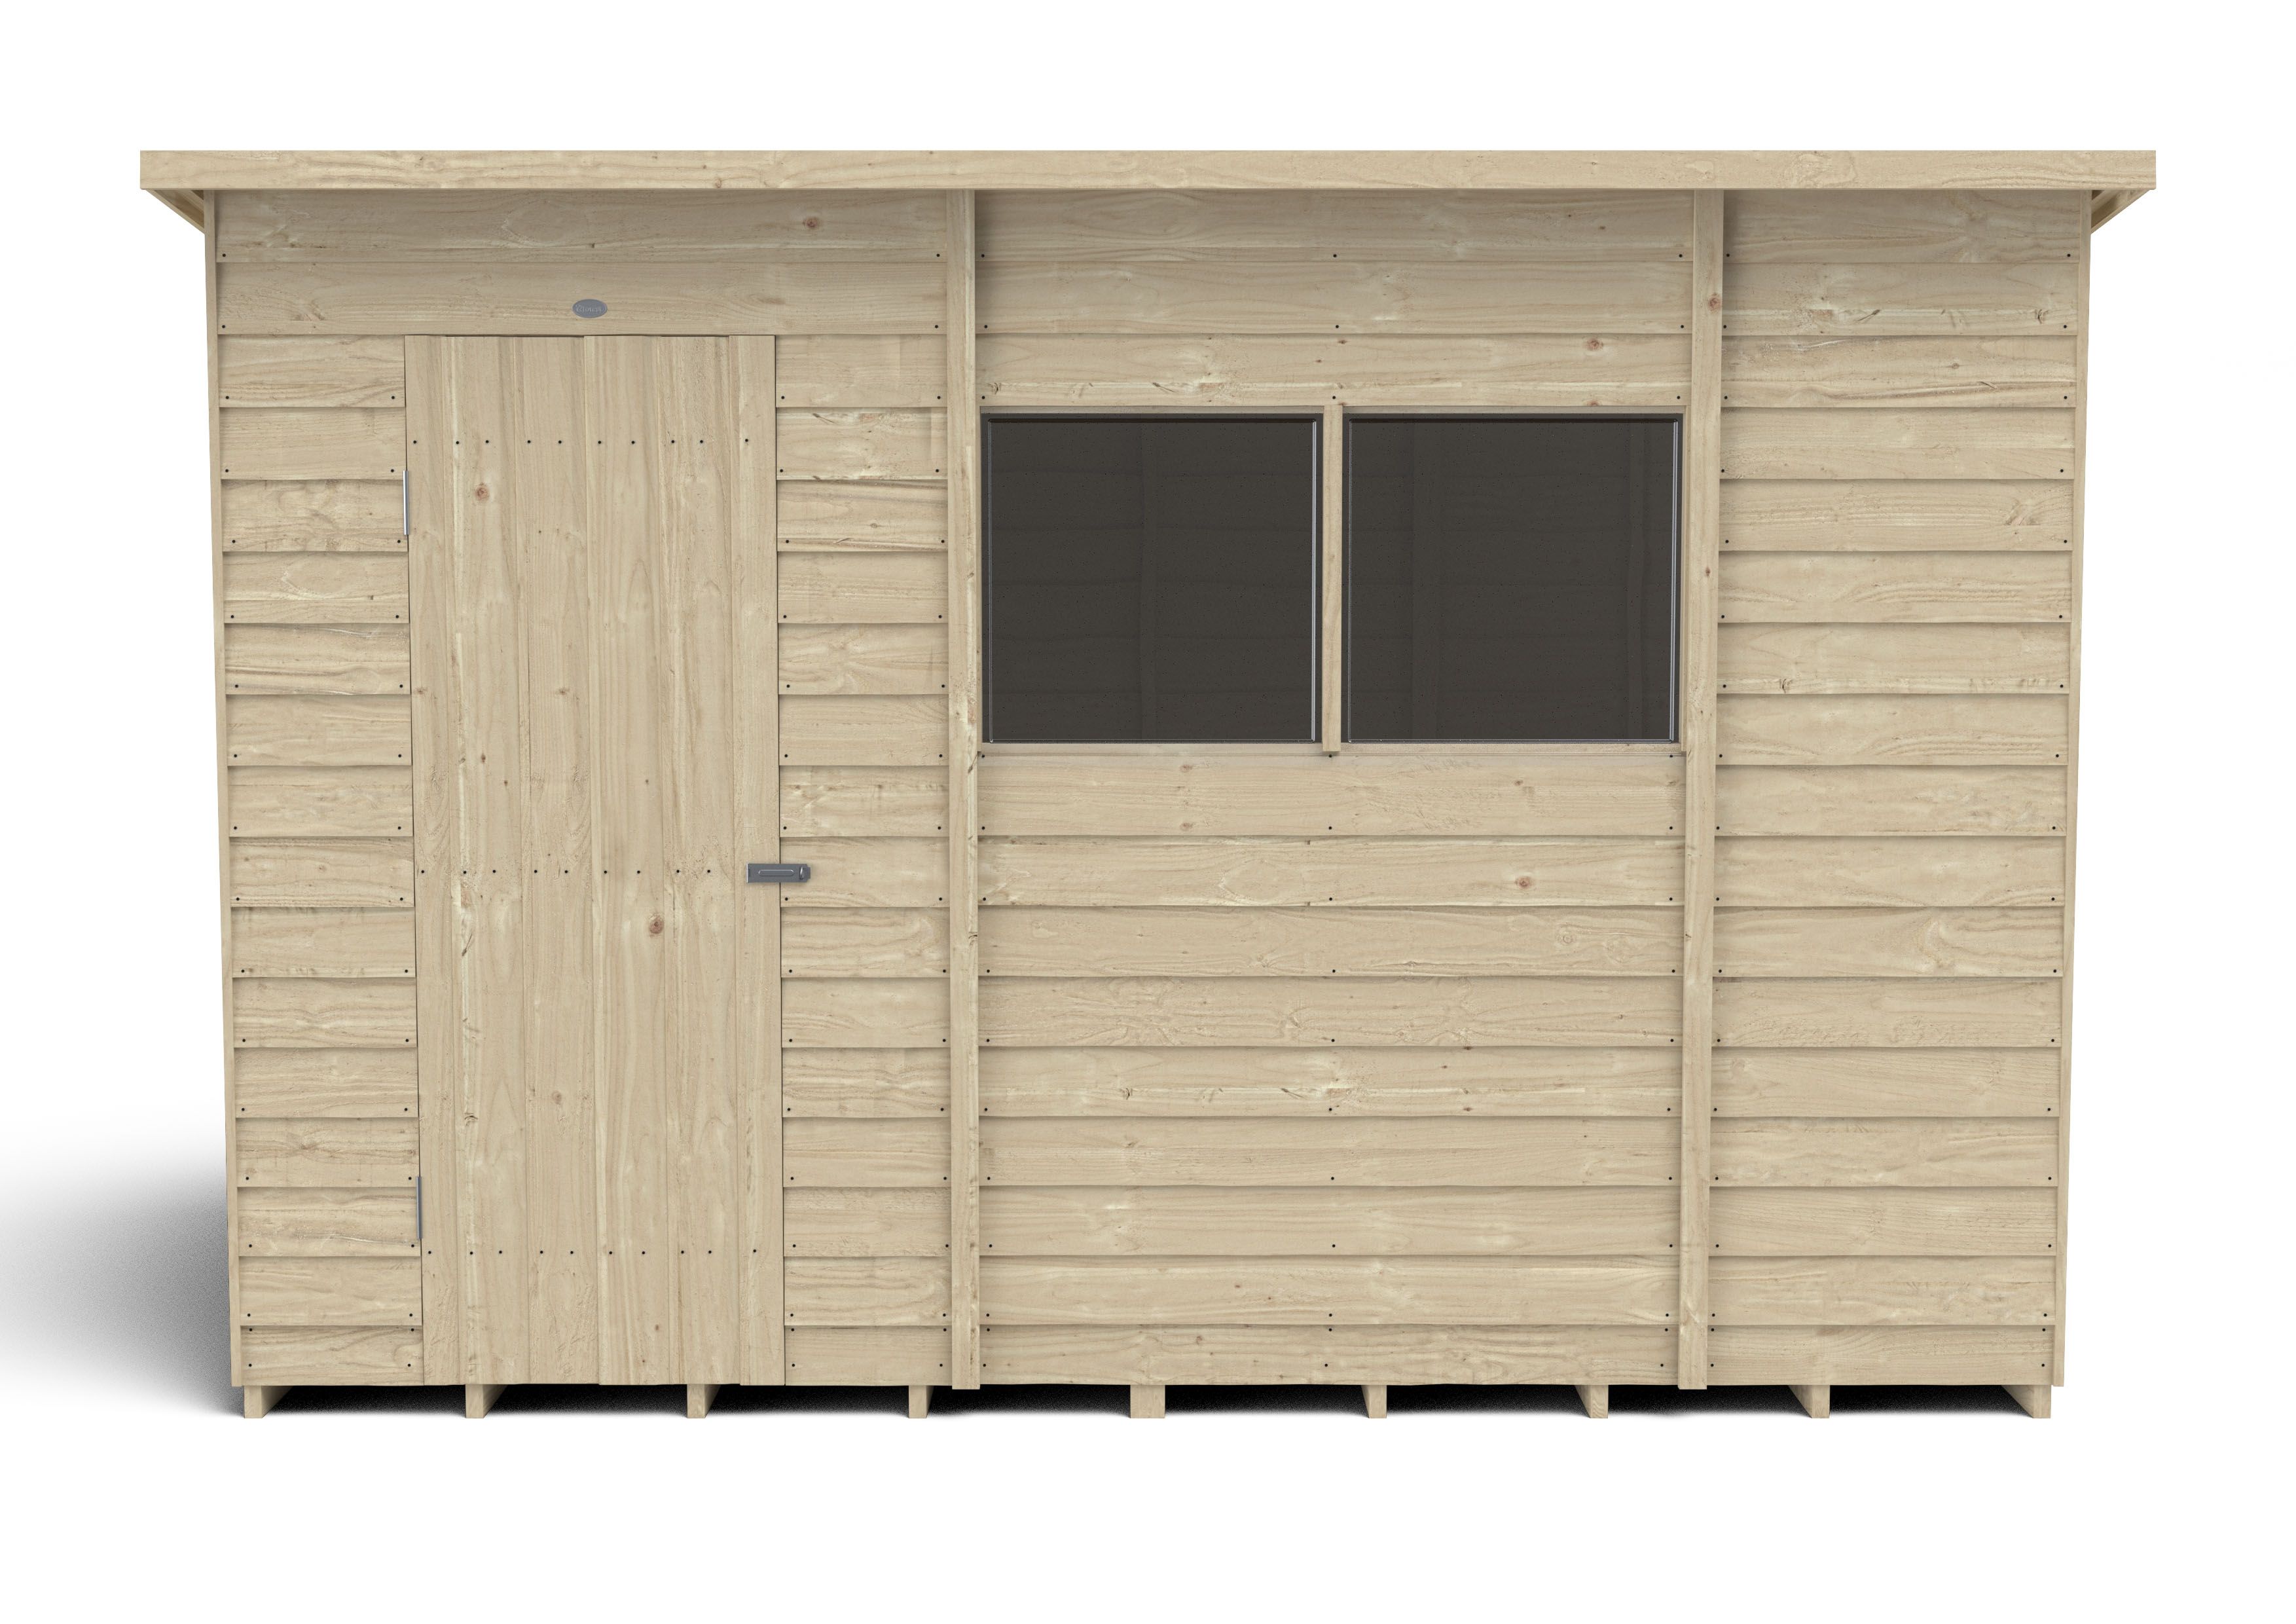 Forest Garden 10x6 ft Pent Wooden Shed with floor & 2 windows